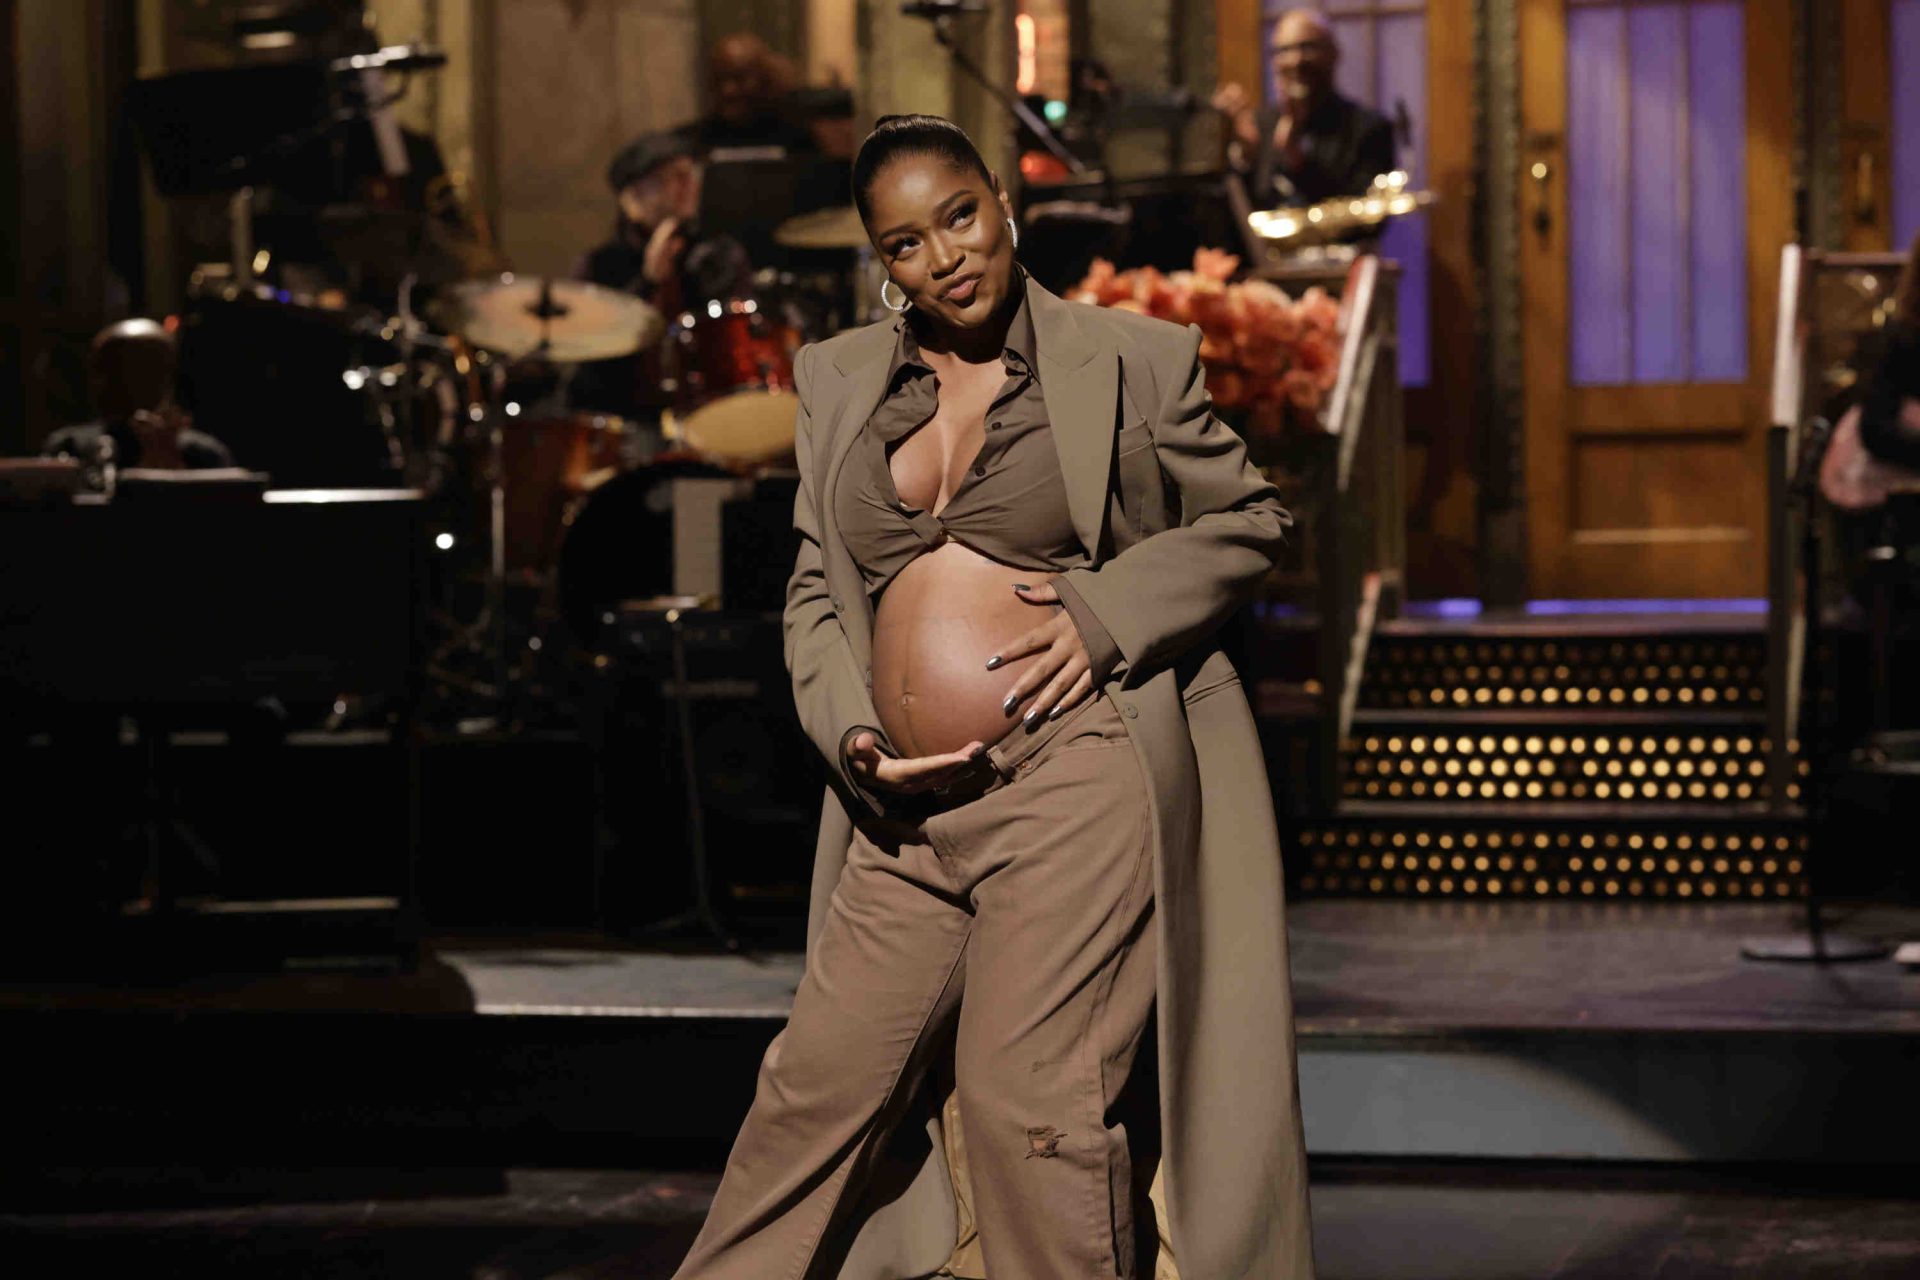 Keke Palmer Shows Off Her Baby Bump After Announcing Her Pregnancy On 'Saturday Night Live' (Reactions)